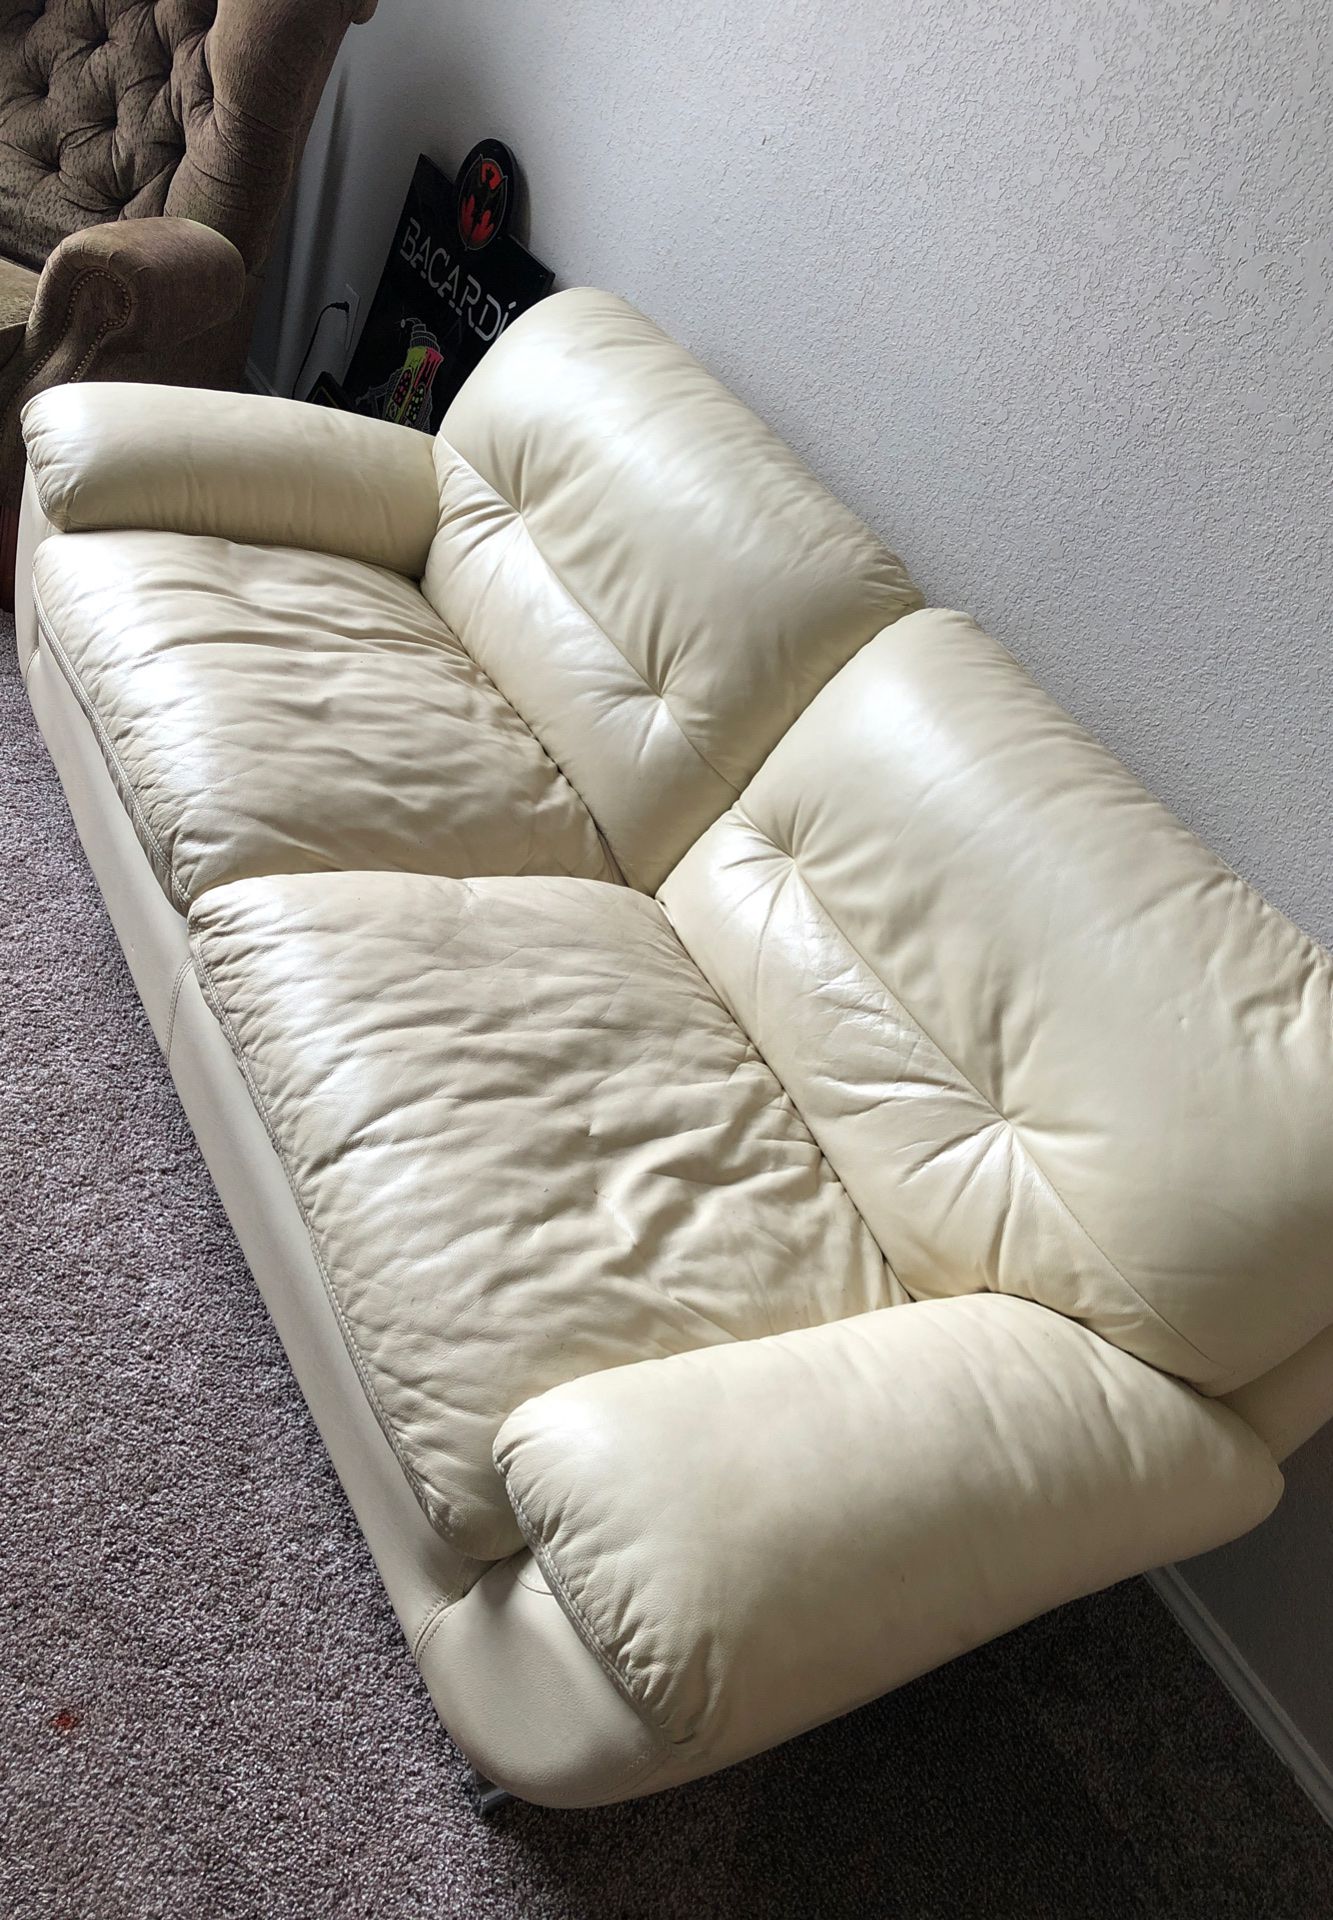 White Leather Couches For In Fort, Leather Furniture Fort Worth